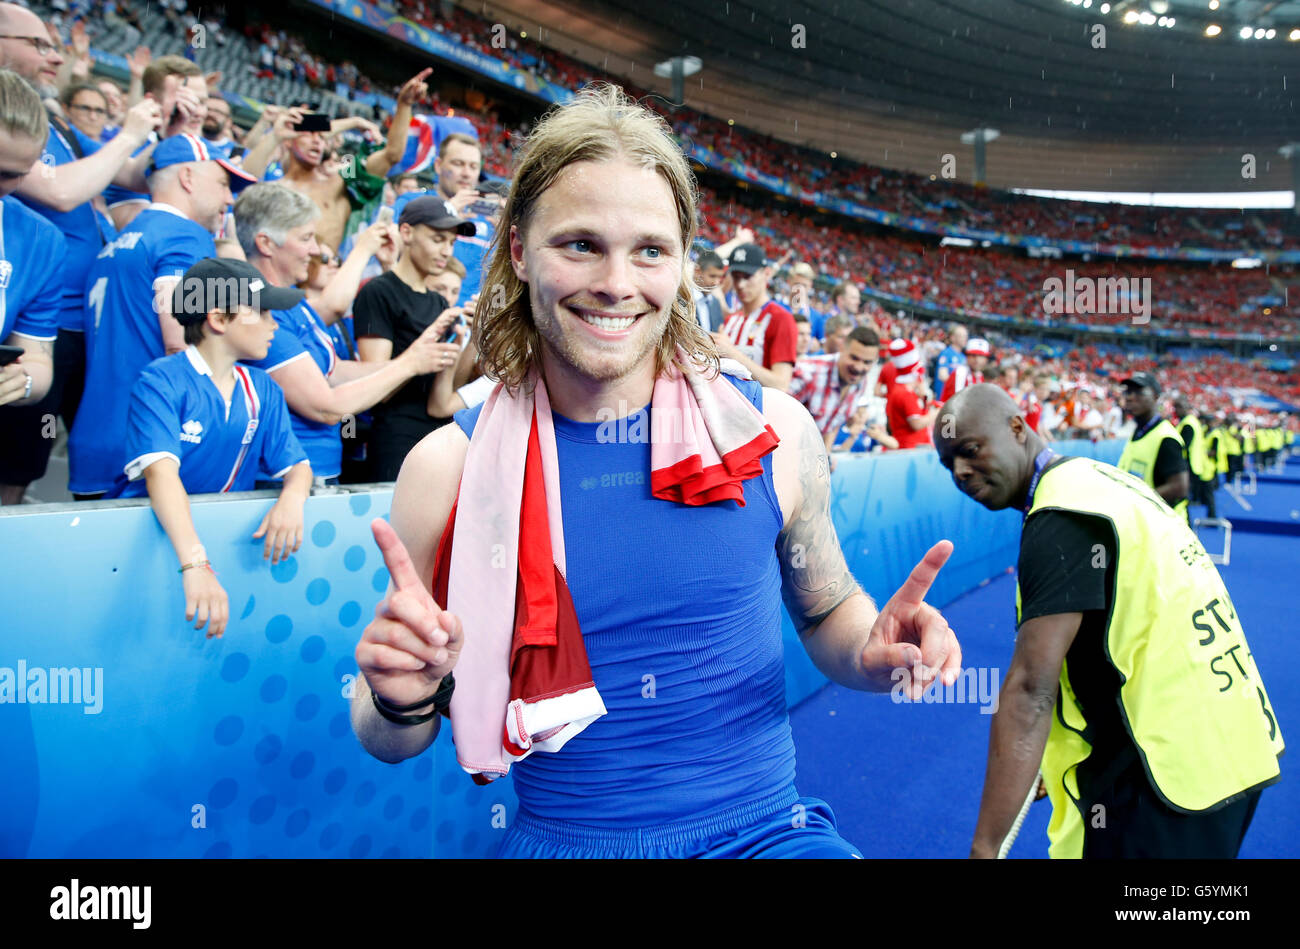 Iceland's Birkir Bjarnason celebrates qualifying for the last 16 round after the Euro 2016, Group F match at the Stade de France, Paris. PRESS ASSOCIATION Photo. Picture date: Wednesday June 22, 2016. See PA story SOCCER Iceland. Photo credit should read: Owen Humphreys/PA Wire. RESTRICTIONS: Use subject to restrictions. Editorial use only. Book and magazine sales permitted providing not solely devoted to any one team/player/match. No commercial use. Call +44 (0)1158 447447 for further information. Stock Photo